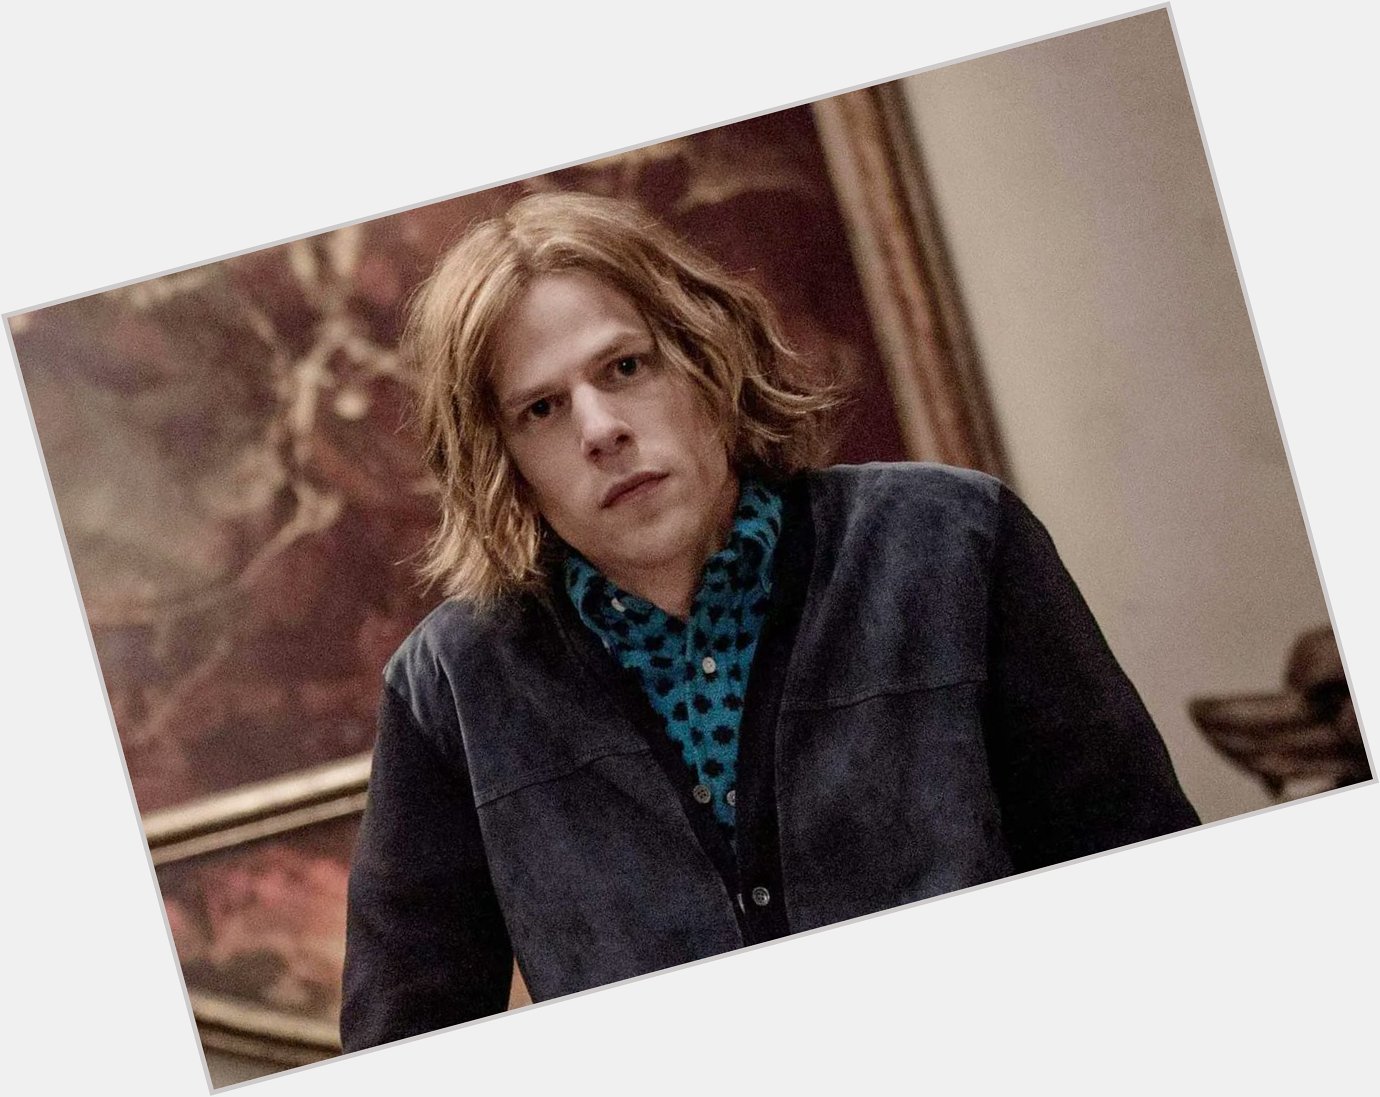 Happy birthday to Jesse Eisenberg, who portrays Lex Luthor in the DC Extended Universe. 